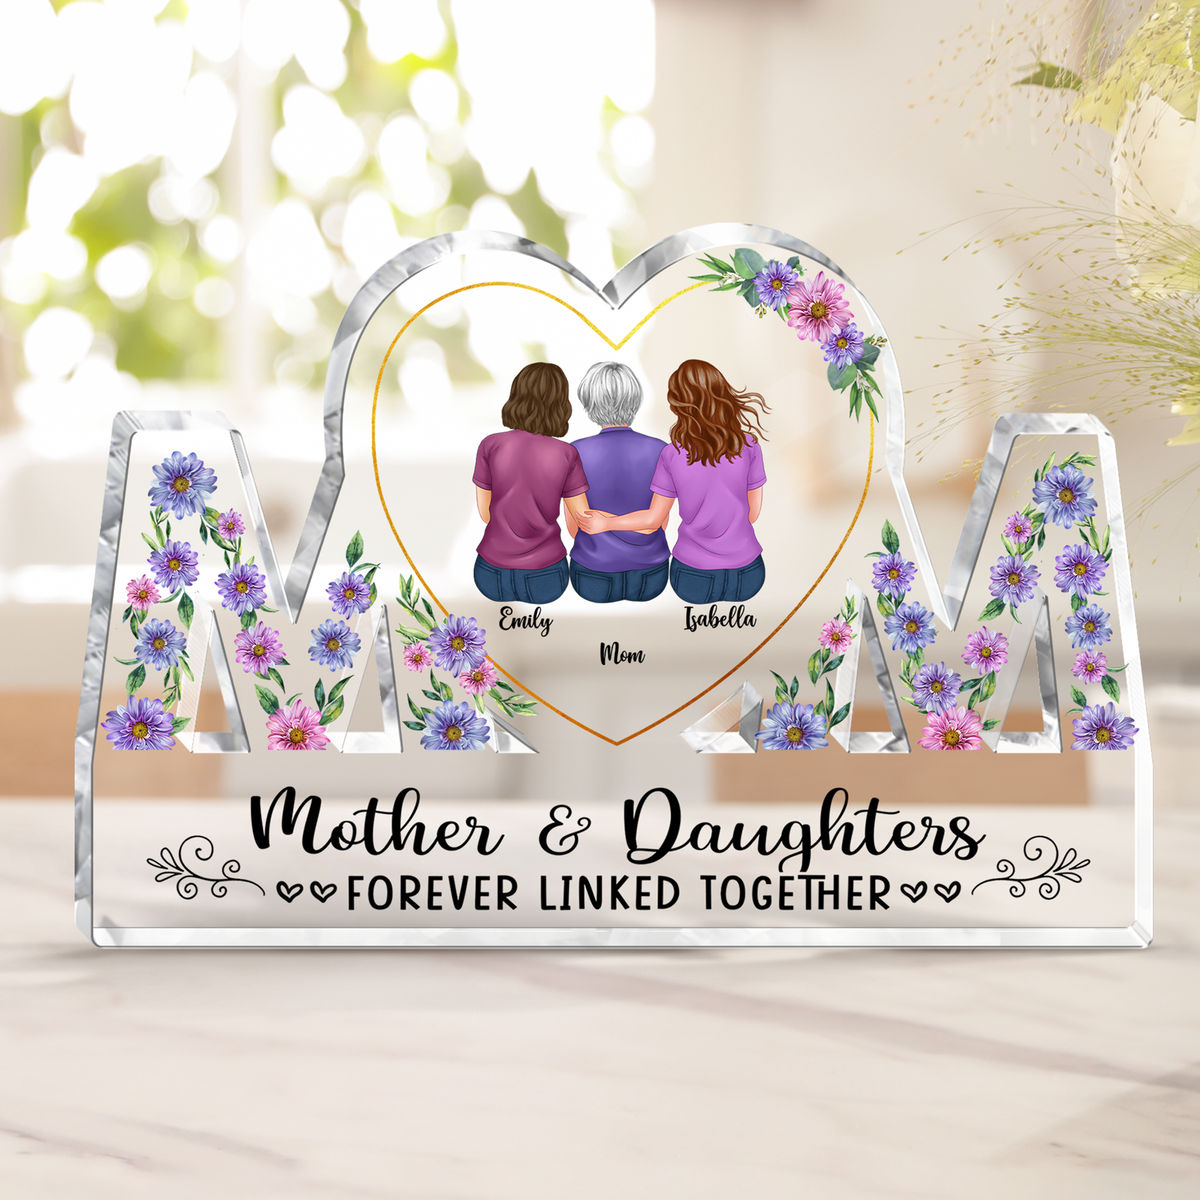 Mother and Daughters forever linked together - Mother's Day Gifts, Birthday Gifts for Mom